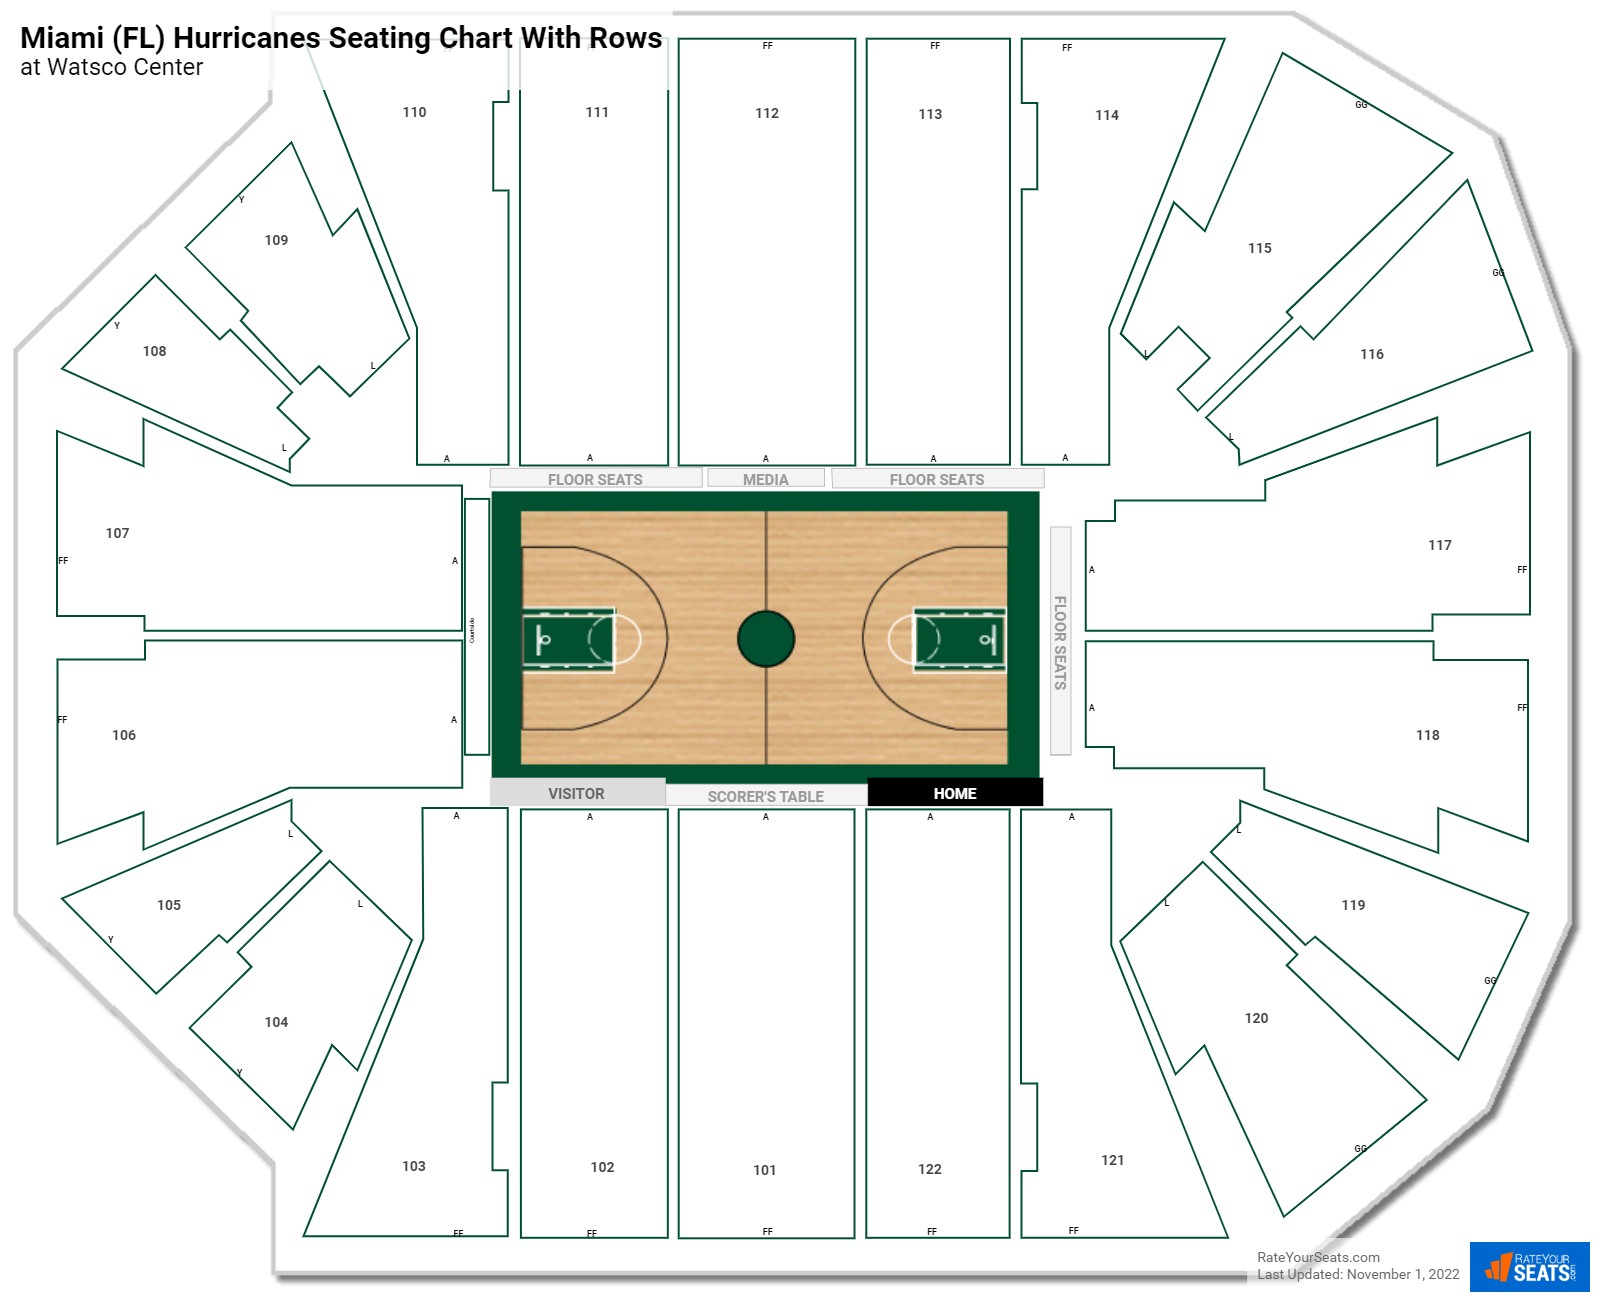 Watsco Center seating chart with row numbers